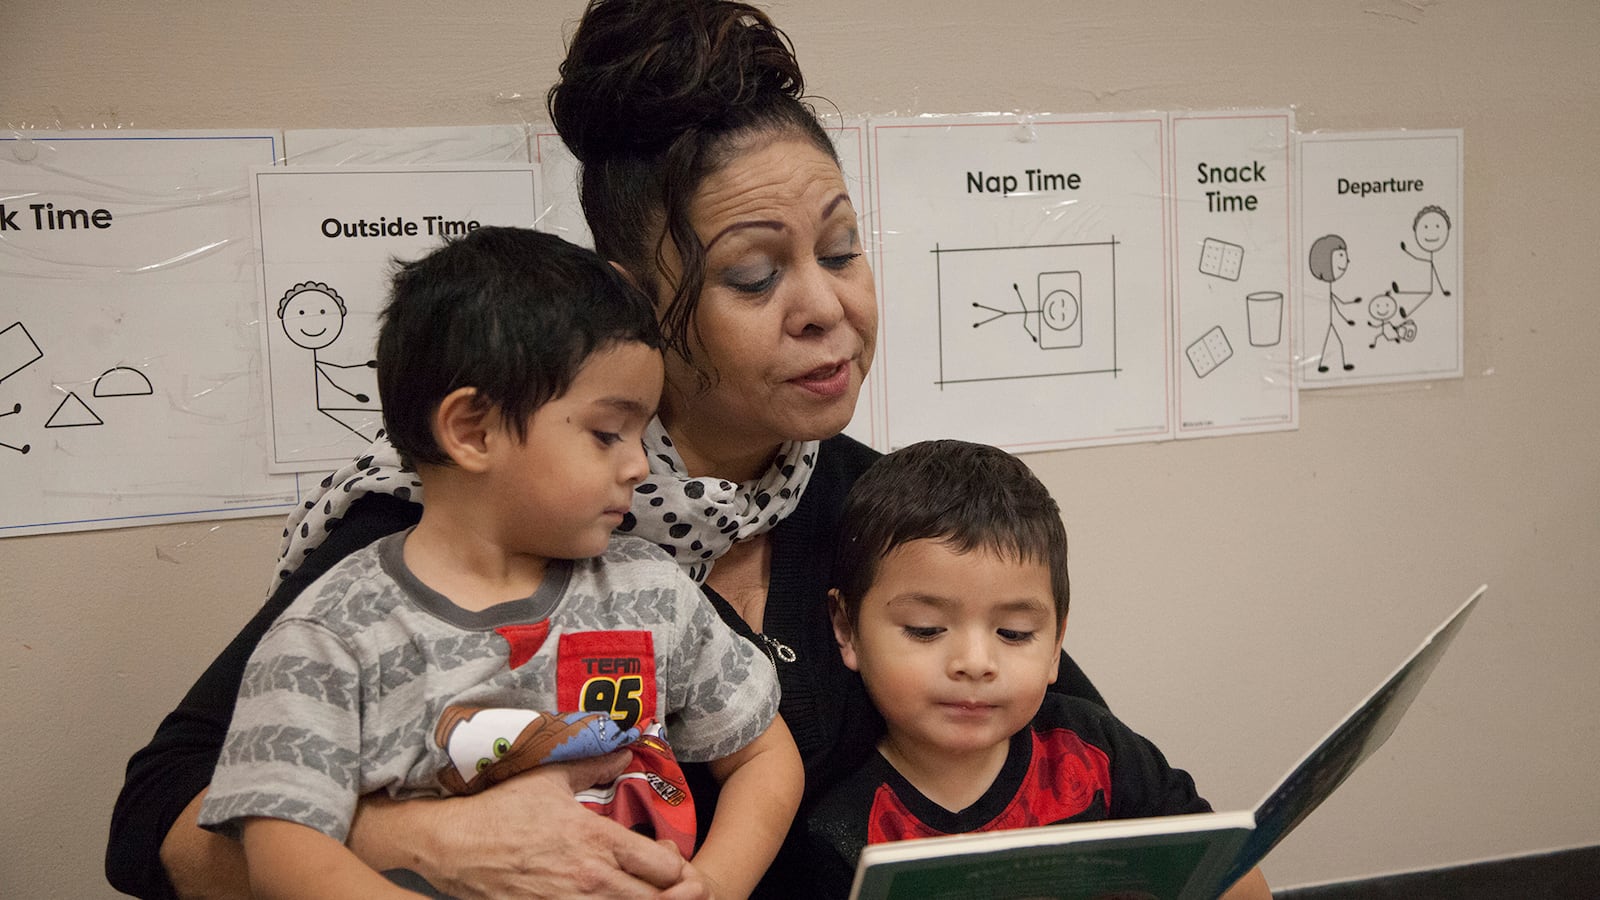 Evangelina De La Fuente worries about the future of the Head Start her 3-year-old twin grandsons, Randy and Prince, attend. "The babies are secure and they’re happy and they’re well fed and they’re well cared for. It’s scary to think it could change," she said.